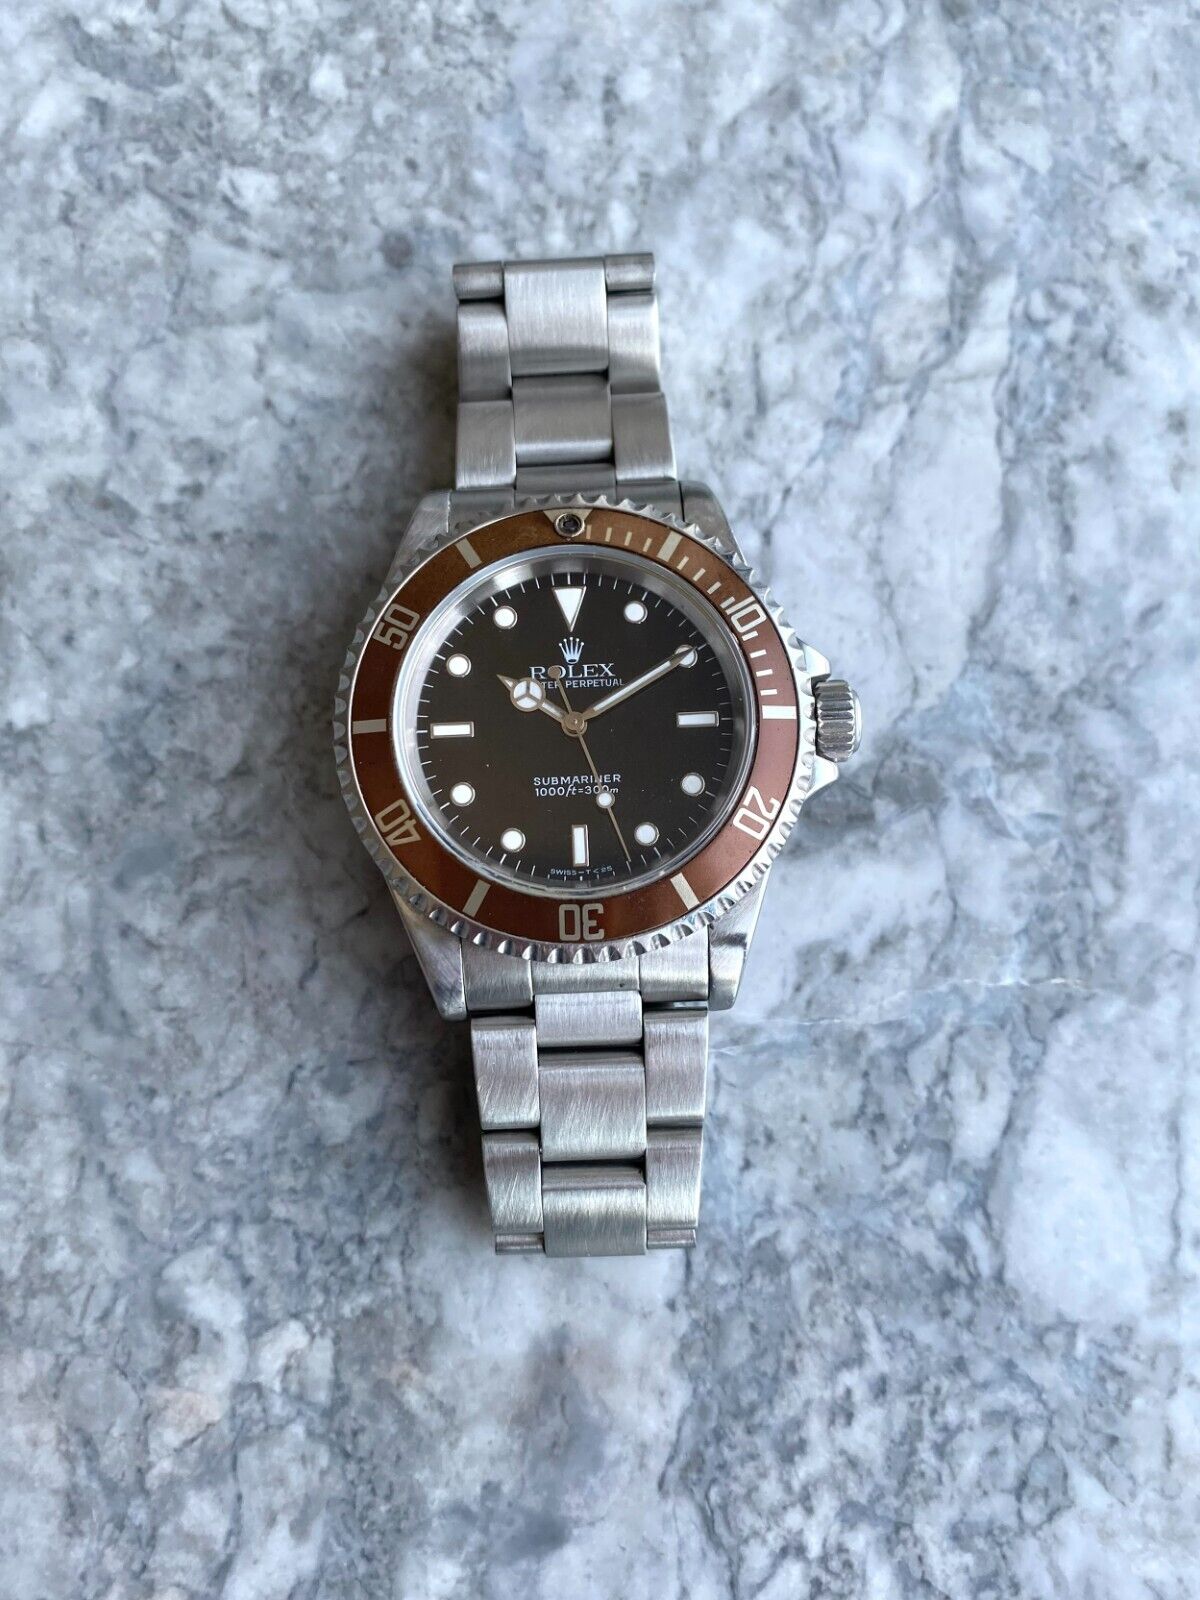 Rolex Submariner ref 14060, available on eBay